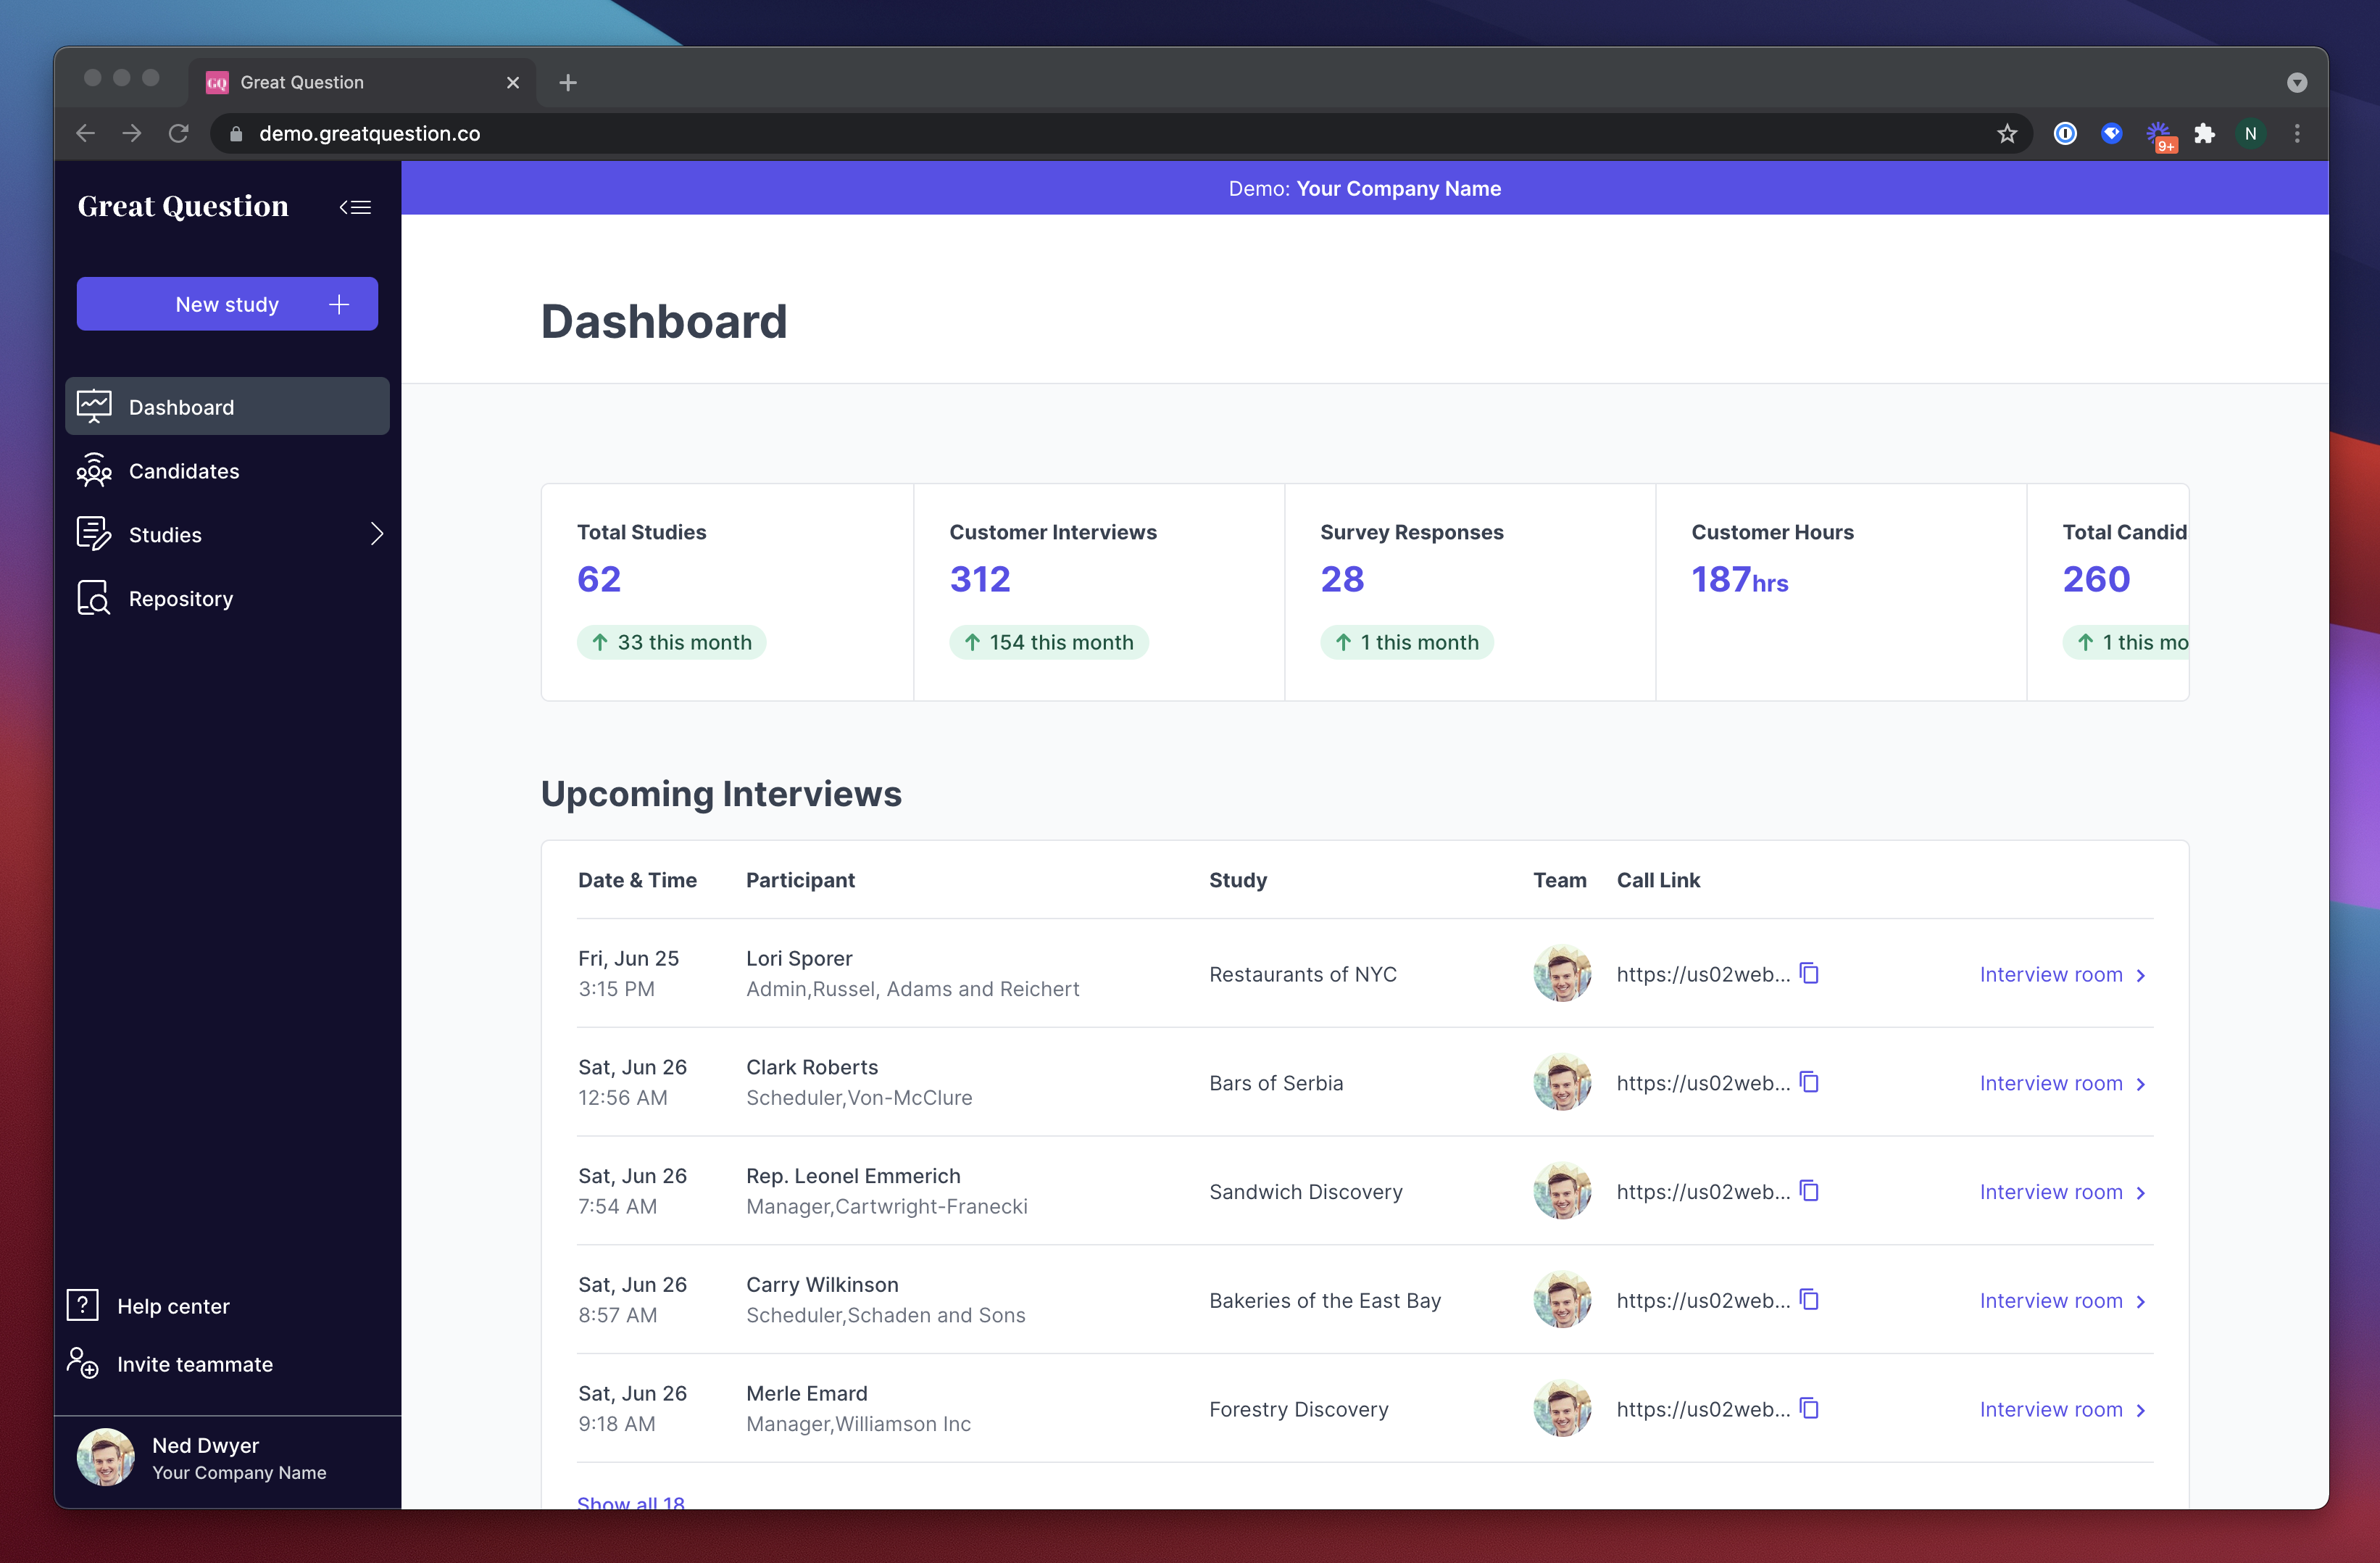 Great Question's user dashboard